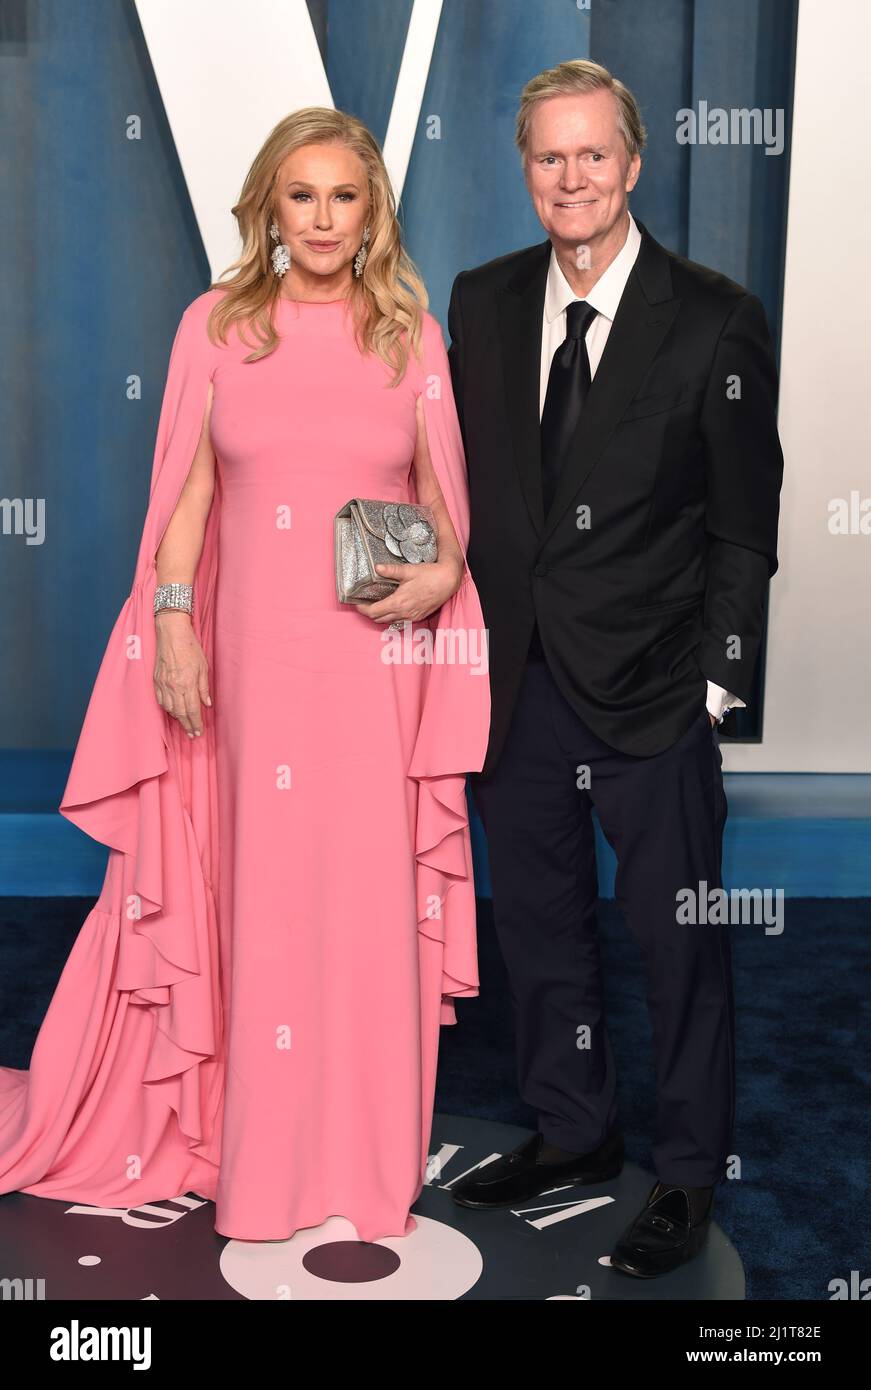 Kathy Hilton and Richard Hilton attending the Vanity Fair Oscar Party held at the Wallis Annenberg Center for the Performing Arts in Beverly Hills, Los Angeles, California, USA. Picture date: Sunday March 27, 2022. Stock Photo